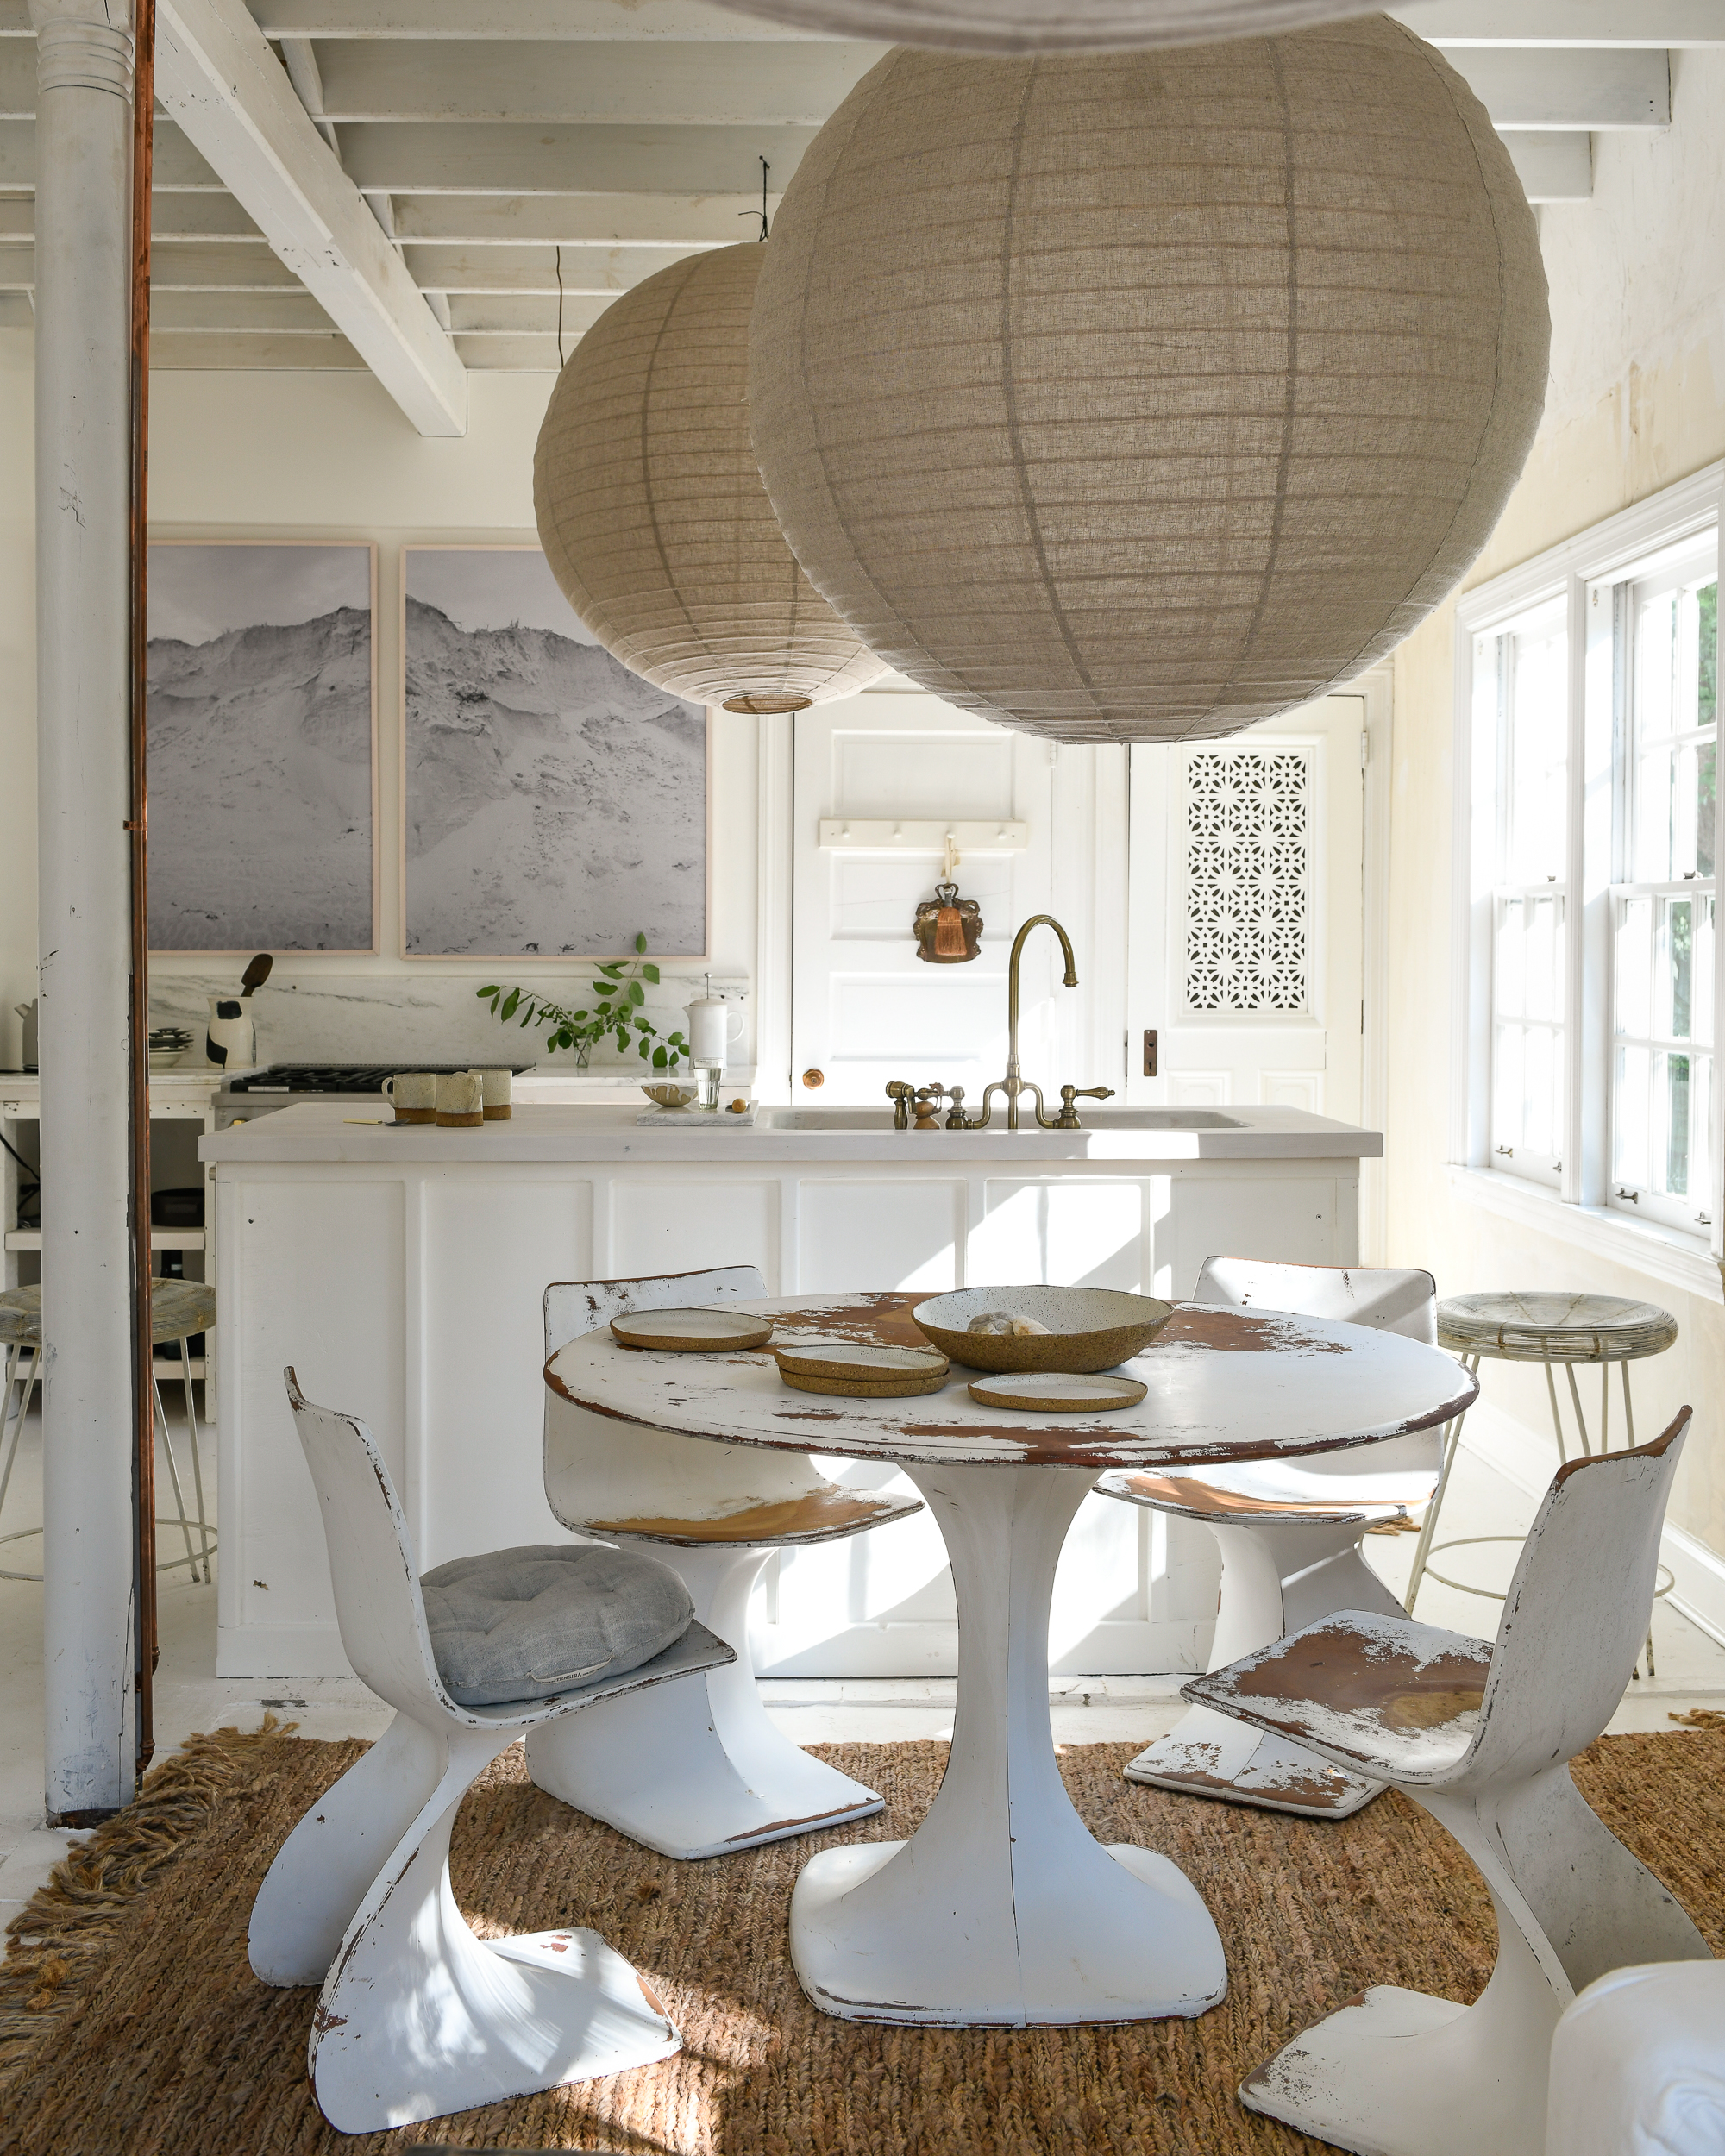 Leanne Ford’s dining area with walls painted in Natural White and styled with furniture and accents in neutral colours